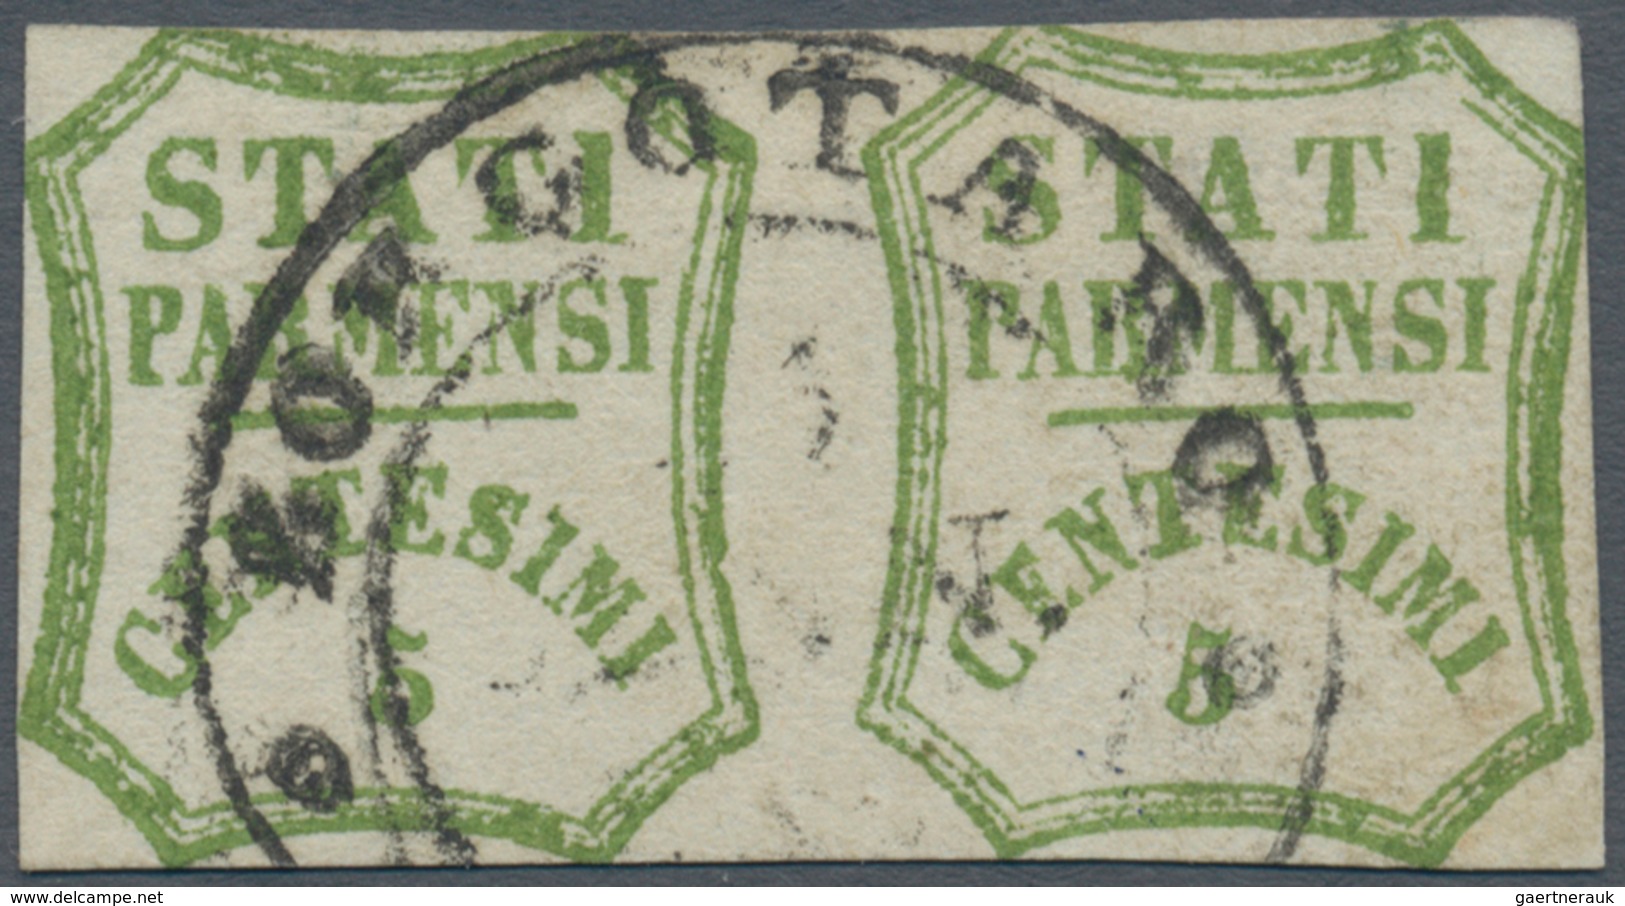 Italien - Altitalienische Staaten: Parma: 1859, Provisional Government, Pair Of 5 Cents, Yellow Gree - Parma